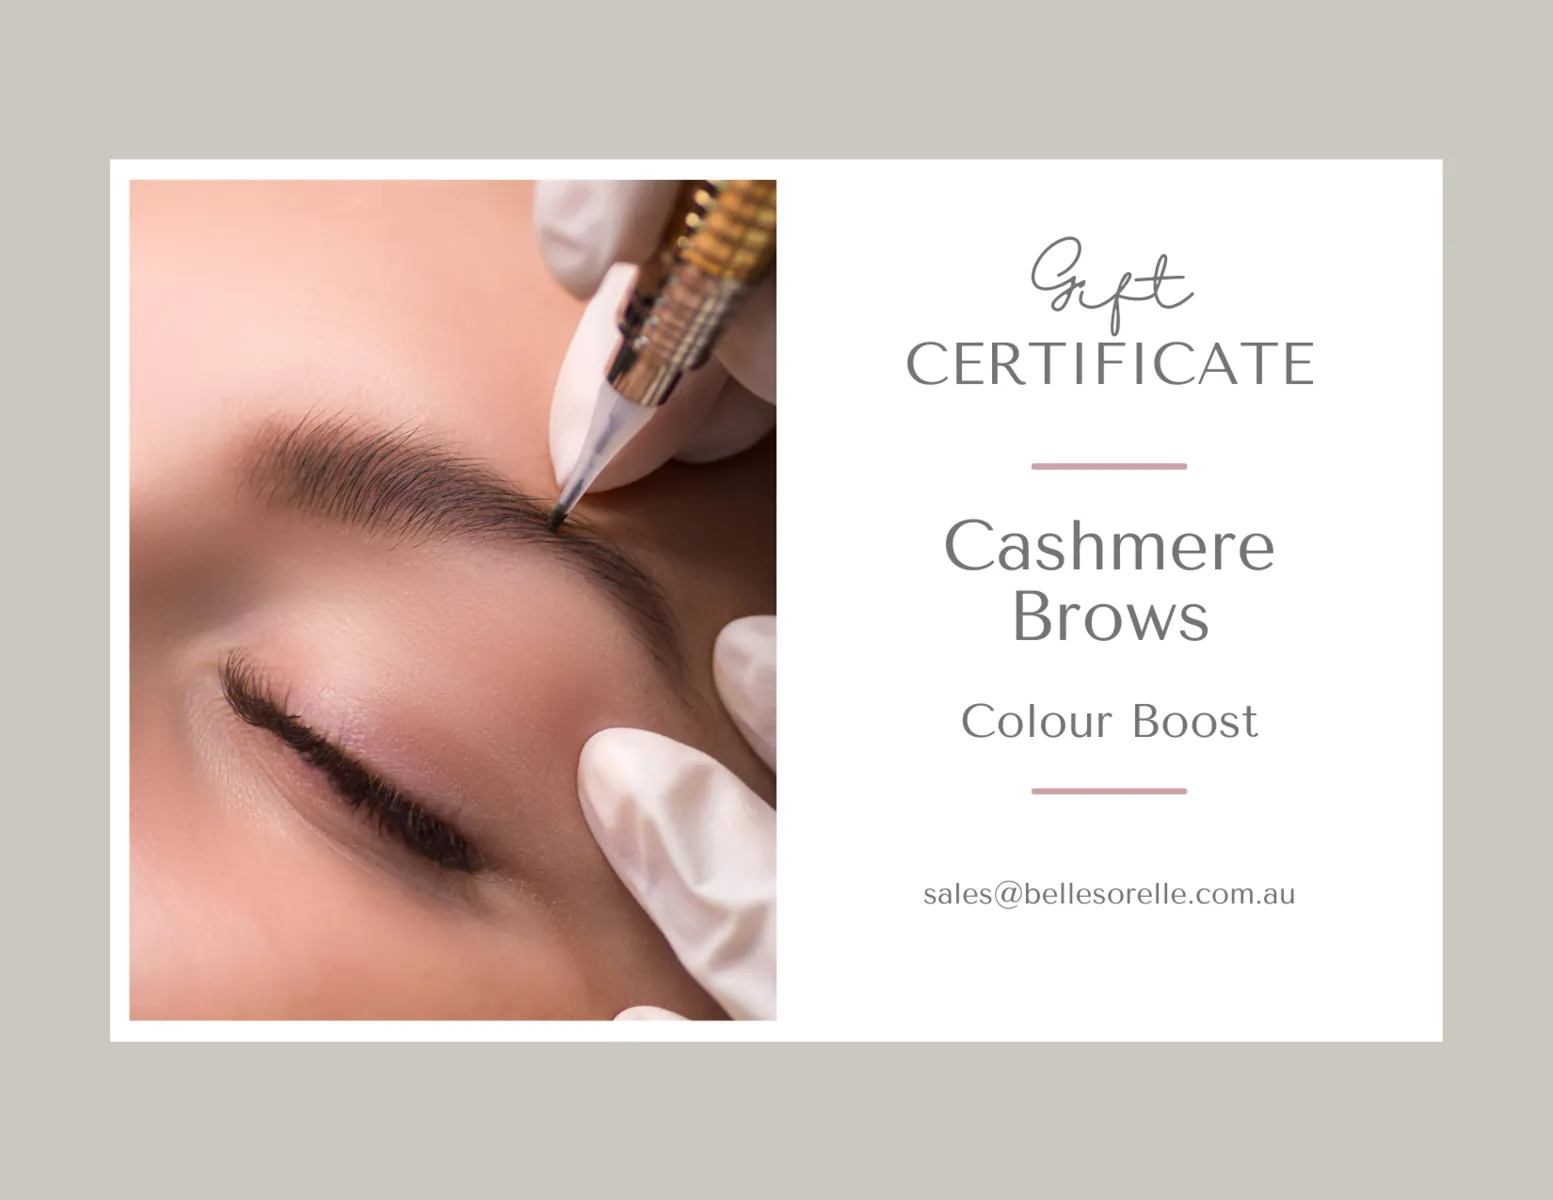 Cashmere Brows - 12 month Colour Boost